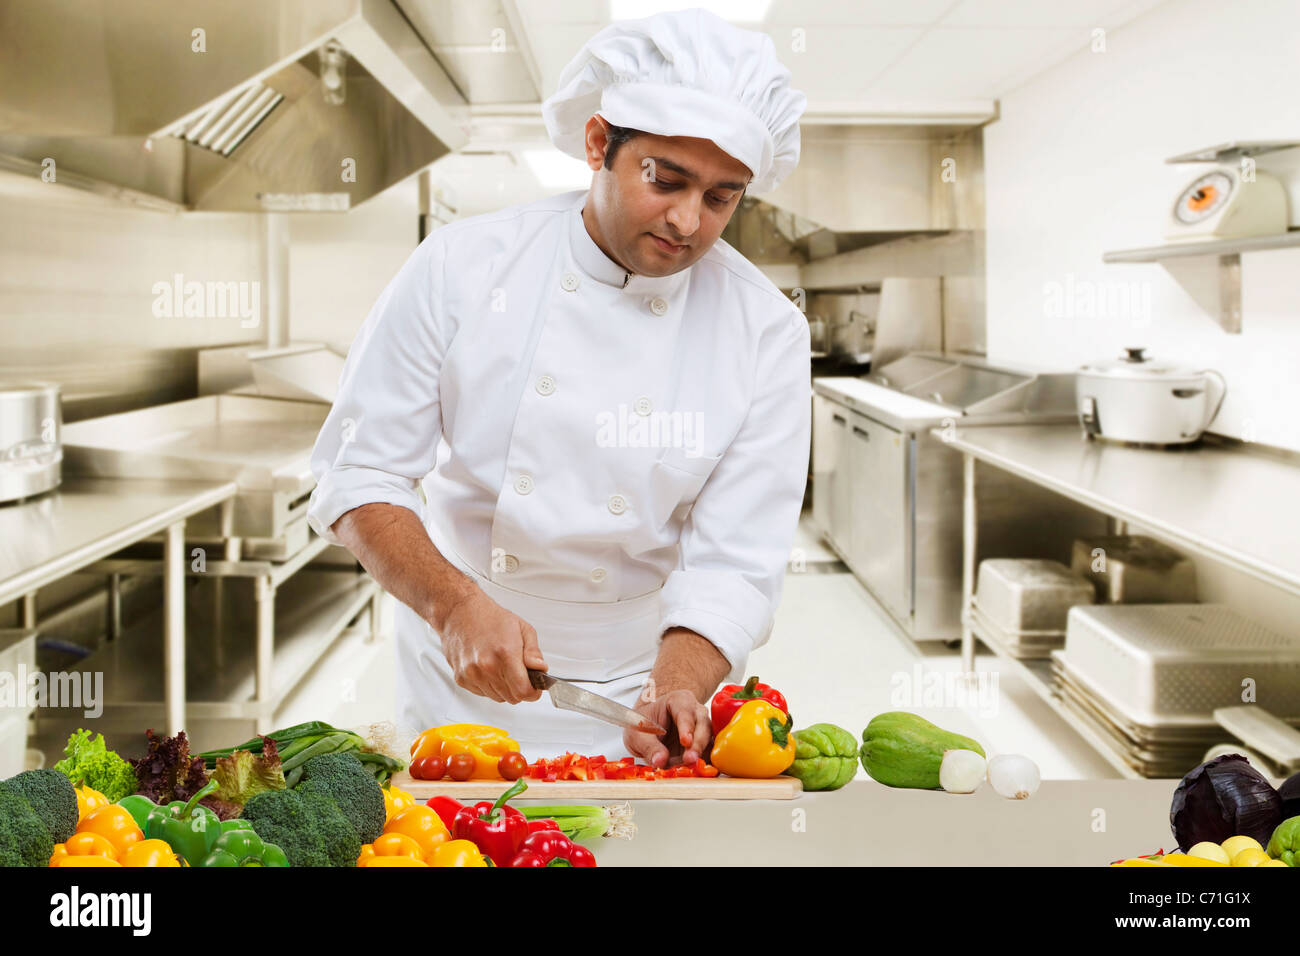 Chef cutting vegetables in the kitchen Stock Photo